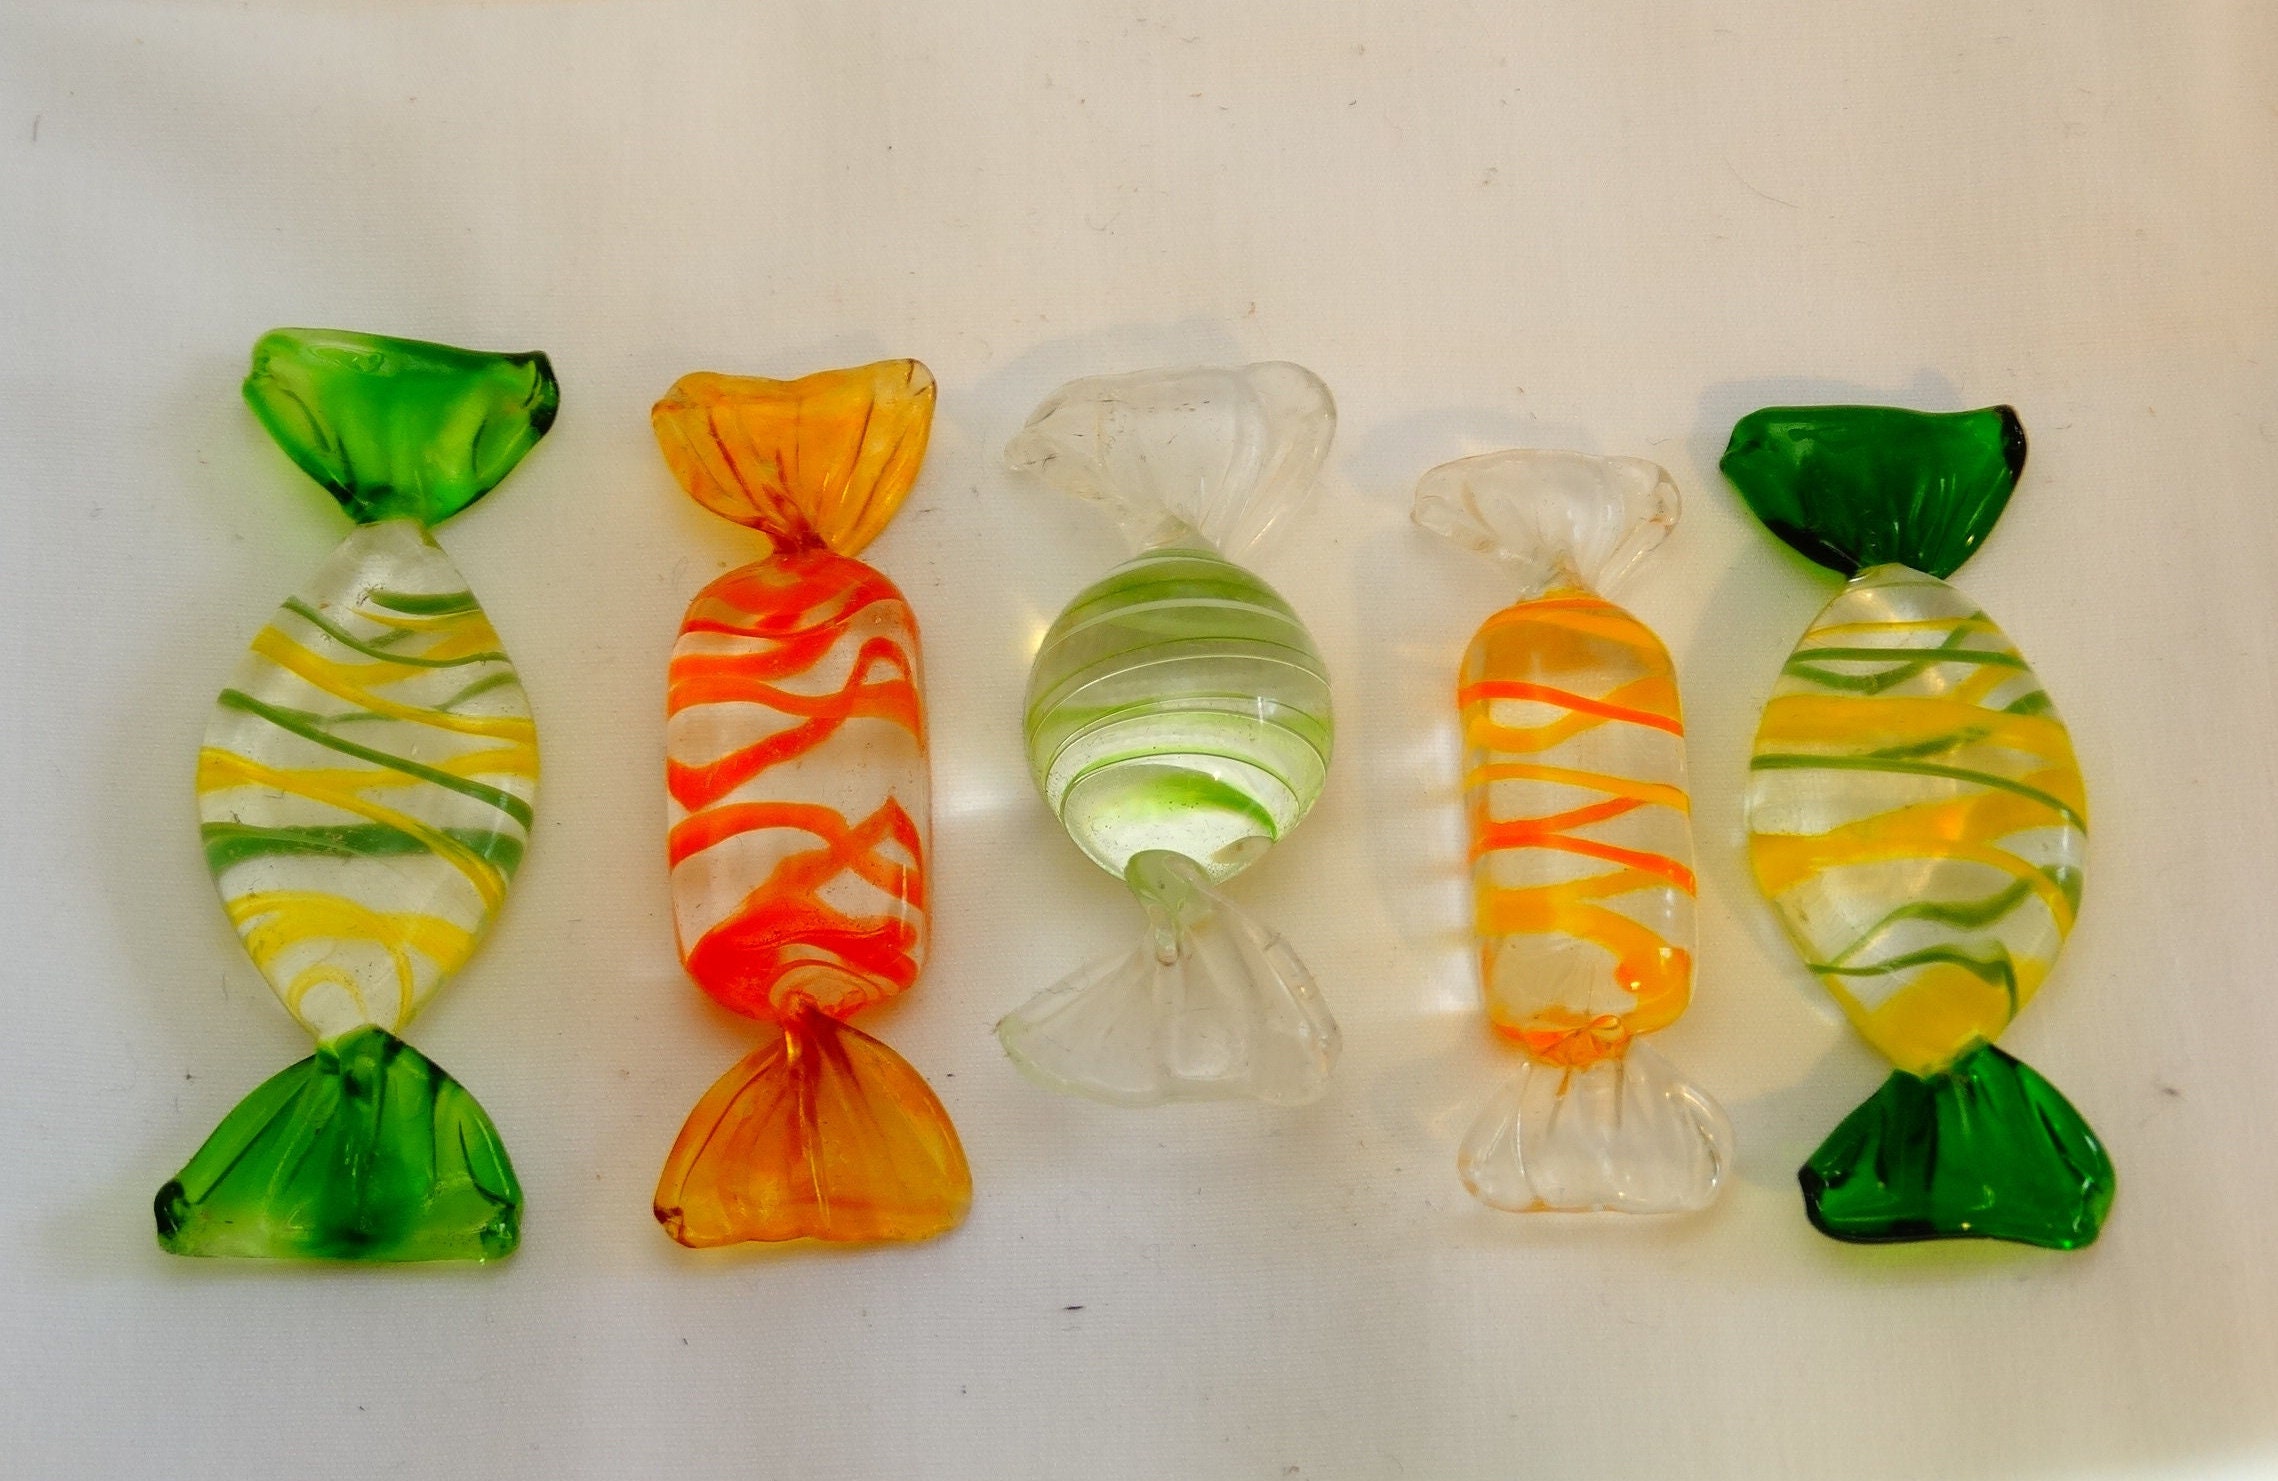 Vintage Glass Wrapped Candy Murano Glass Candy Holiday